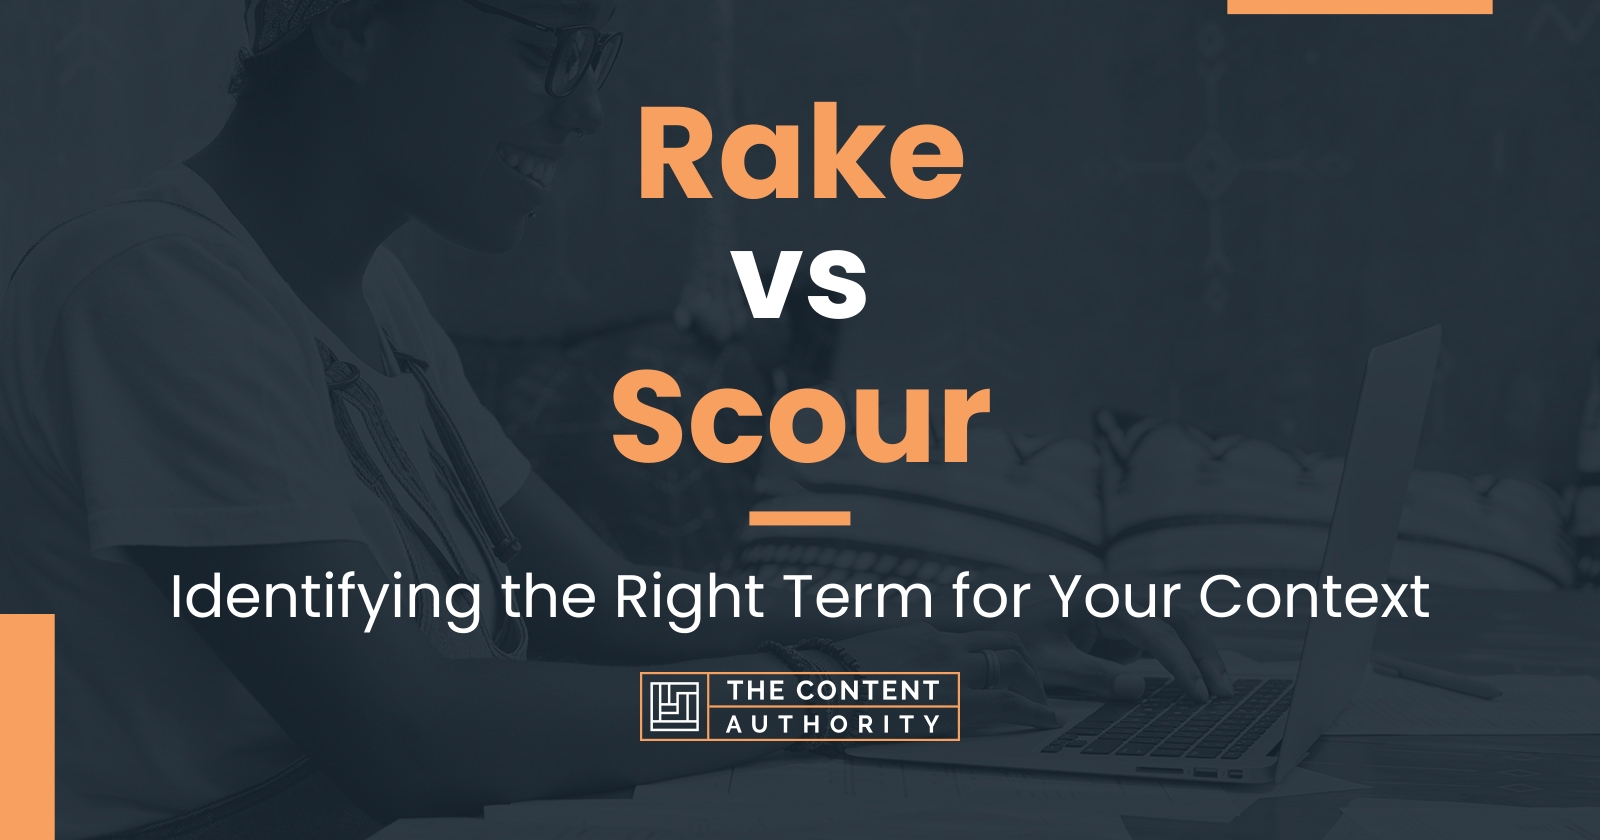 Rake vs Scour: Identifying the Right Term for Your Context